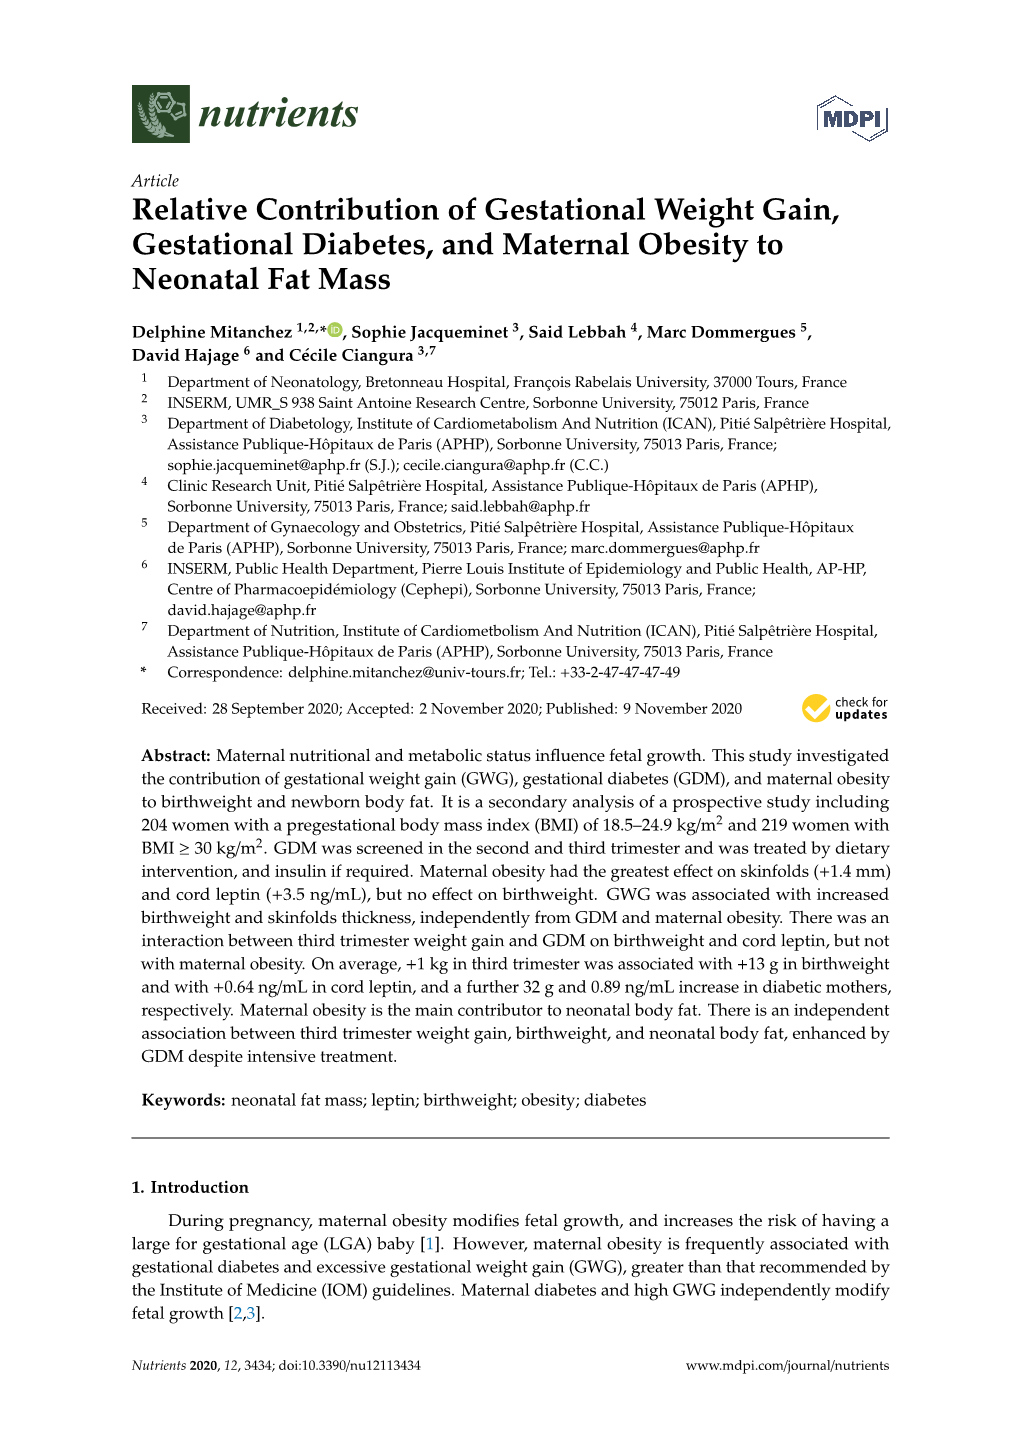 Relative Contribution of Gestational Weight Gain, Gestational Diabetes, and Maternal Obesity to Neonatal Fat Mass